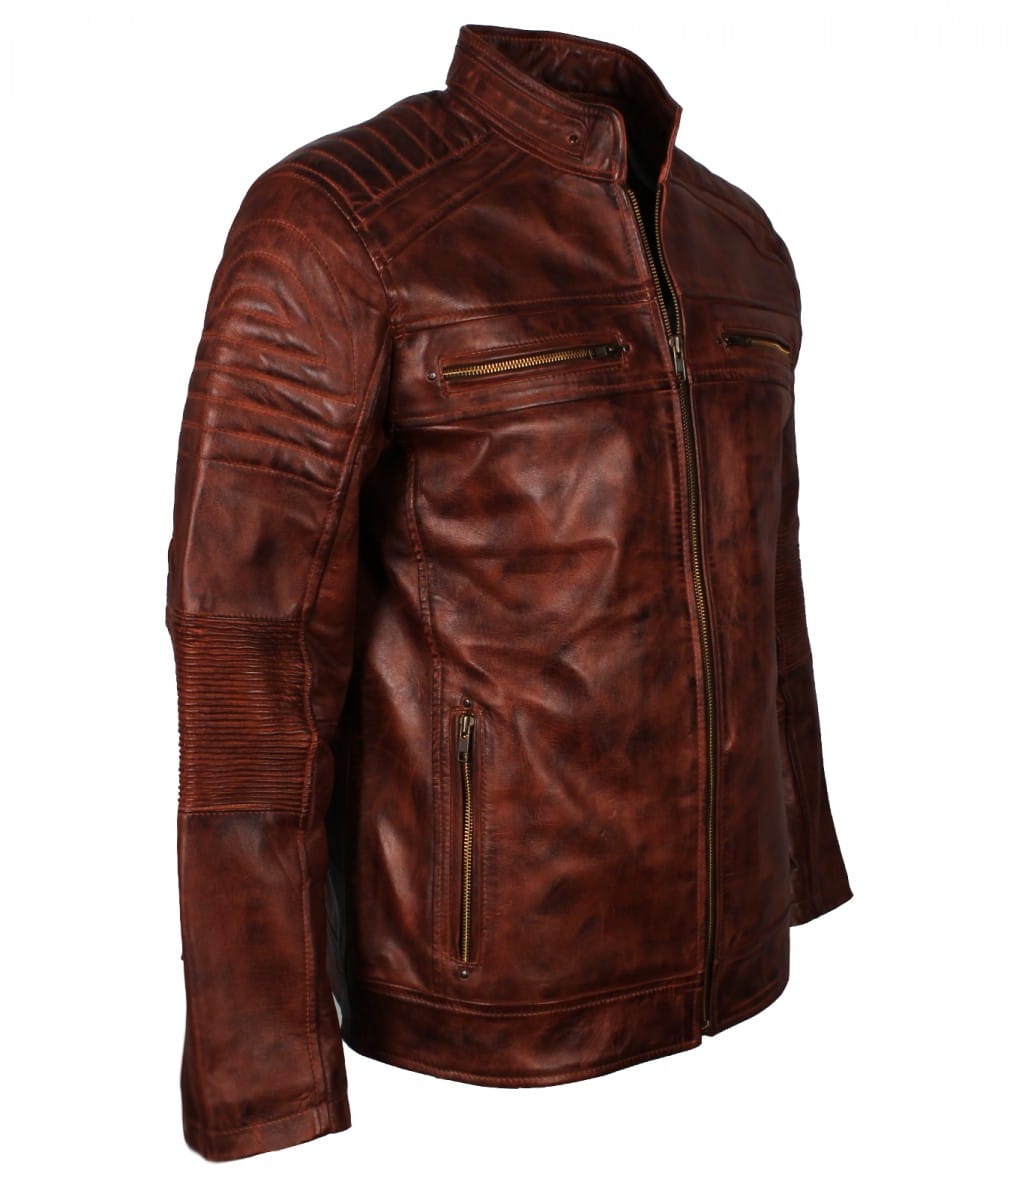 Men's Brown Waxed Vintage Leather Jacket - US Leather Mart